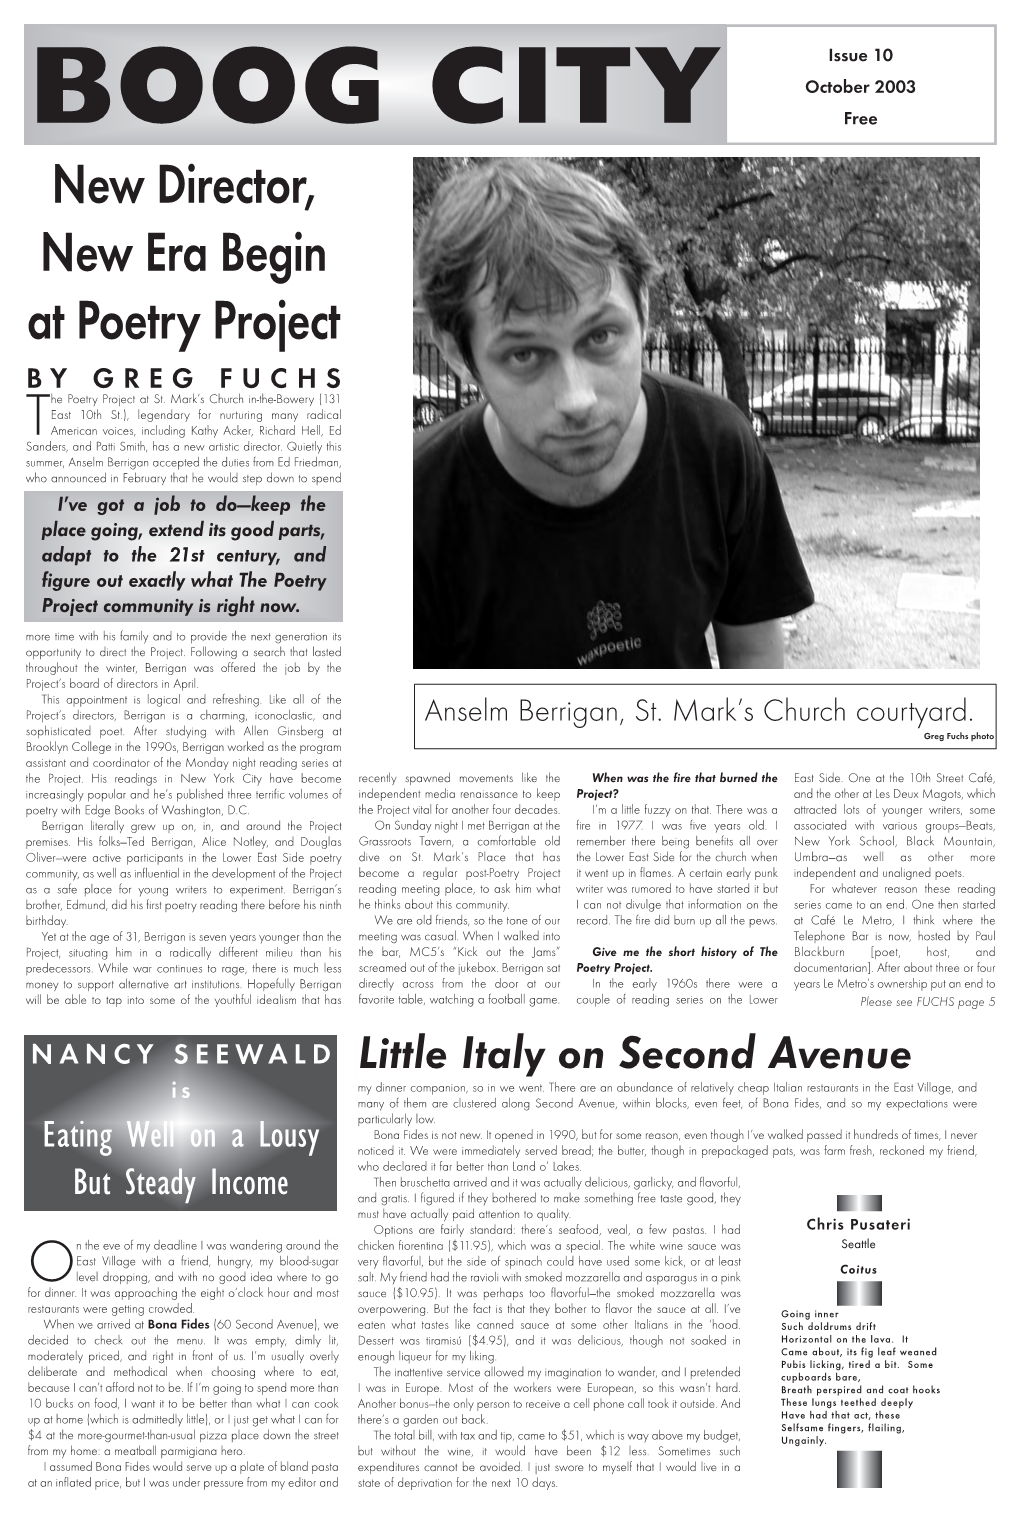 New Director, New Era Begin at Poetry Project by GREG FUCHS He Poetry Project at St